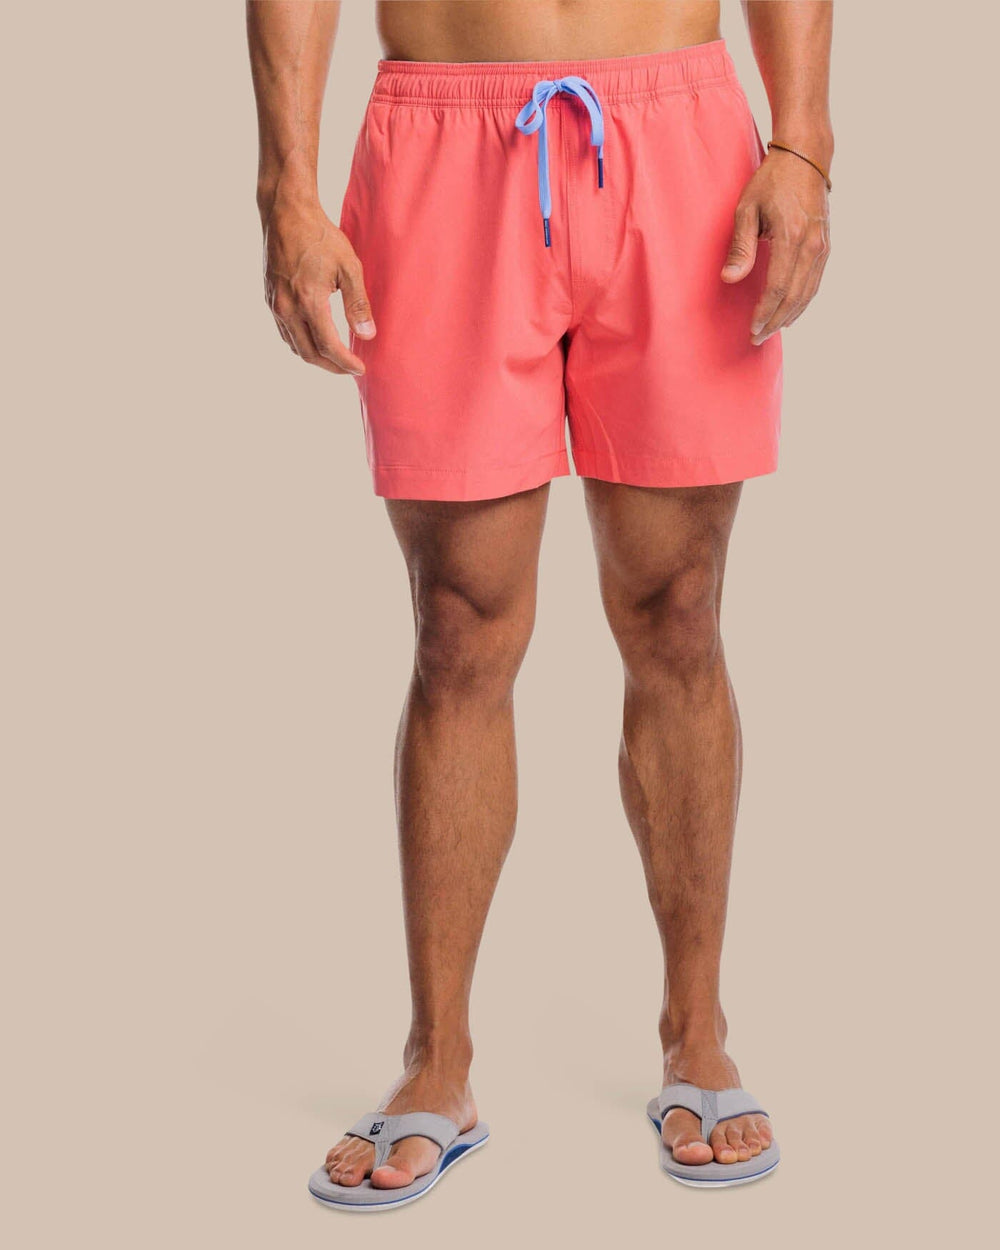 The front view of the Southern Tide Solid Swim Trunk 3 by Southern Tide - Sunkist Coral